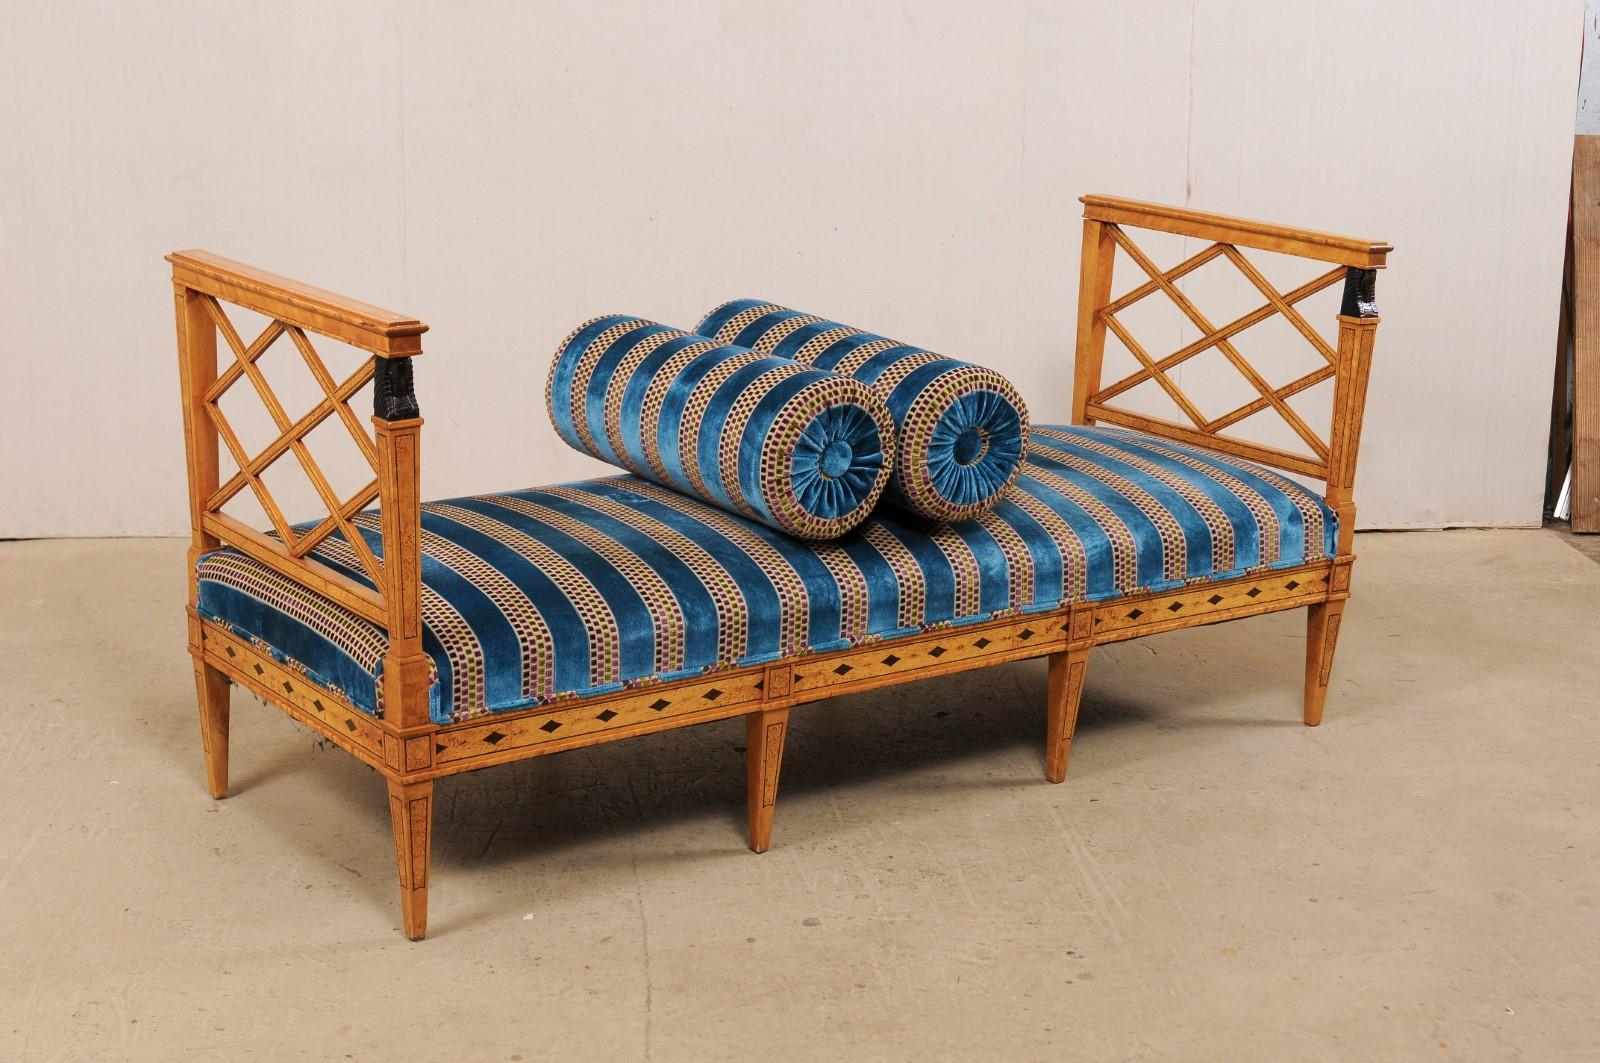 Upholstery Swedish Neoclassical Style Upholstered Bench with Egyptian Revival Carvings